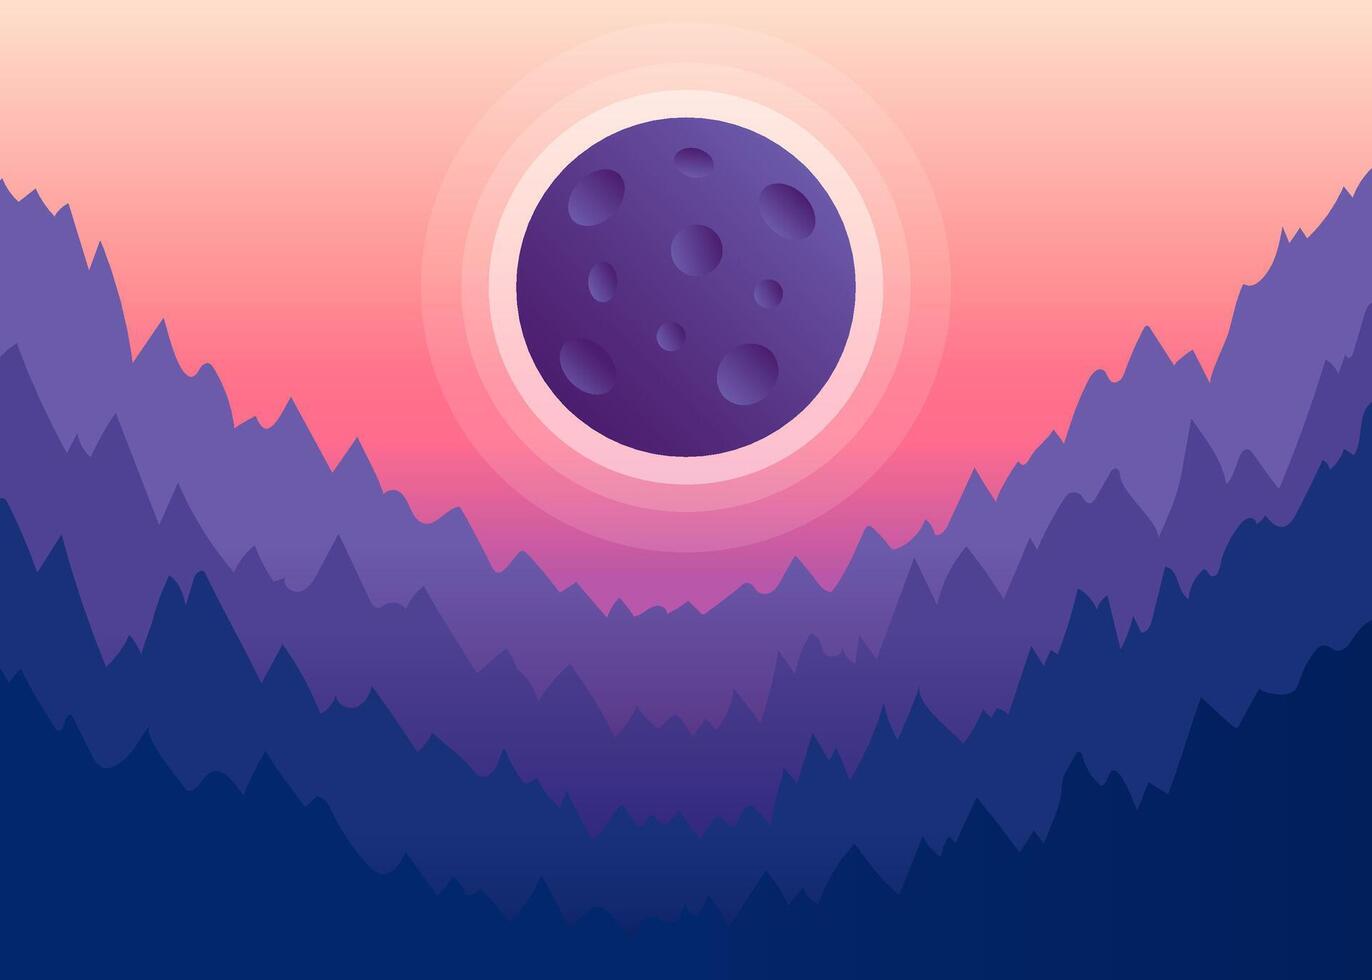 Solar eclipse in nature with mountain. Moon shading sun. Eclipse phase with formation total umbra. Vector illustration